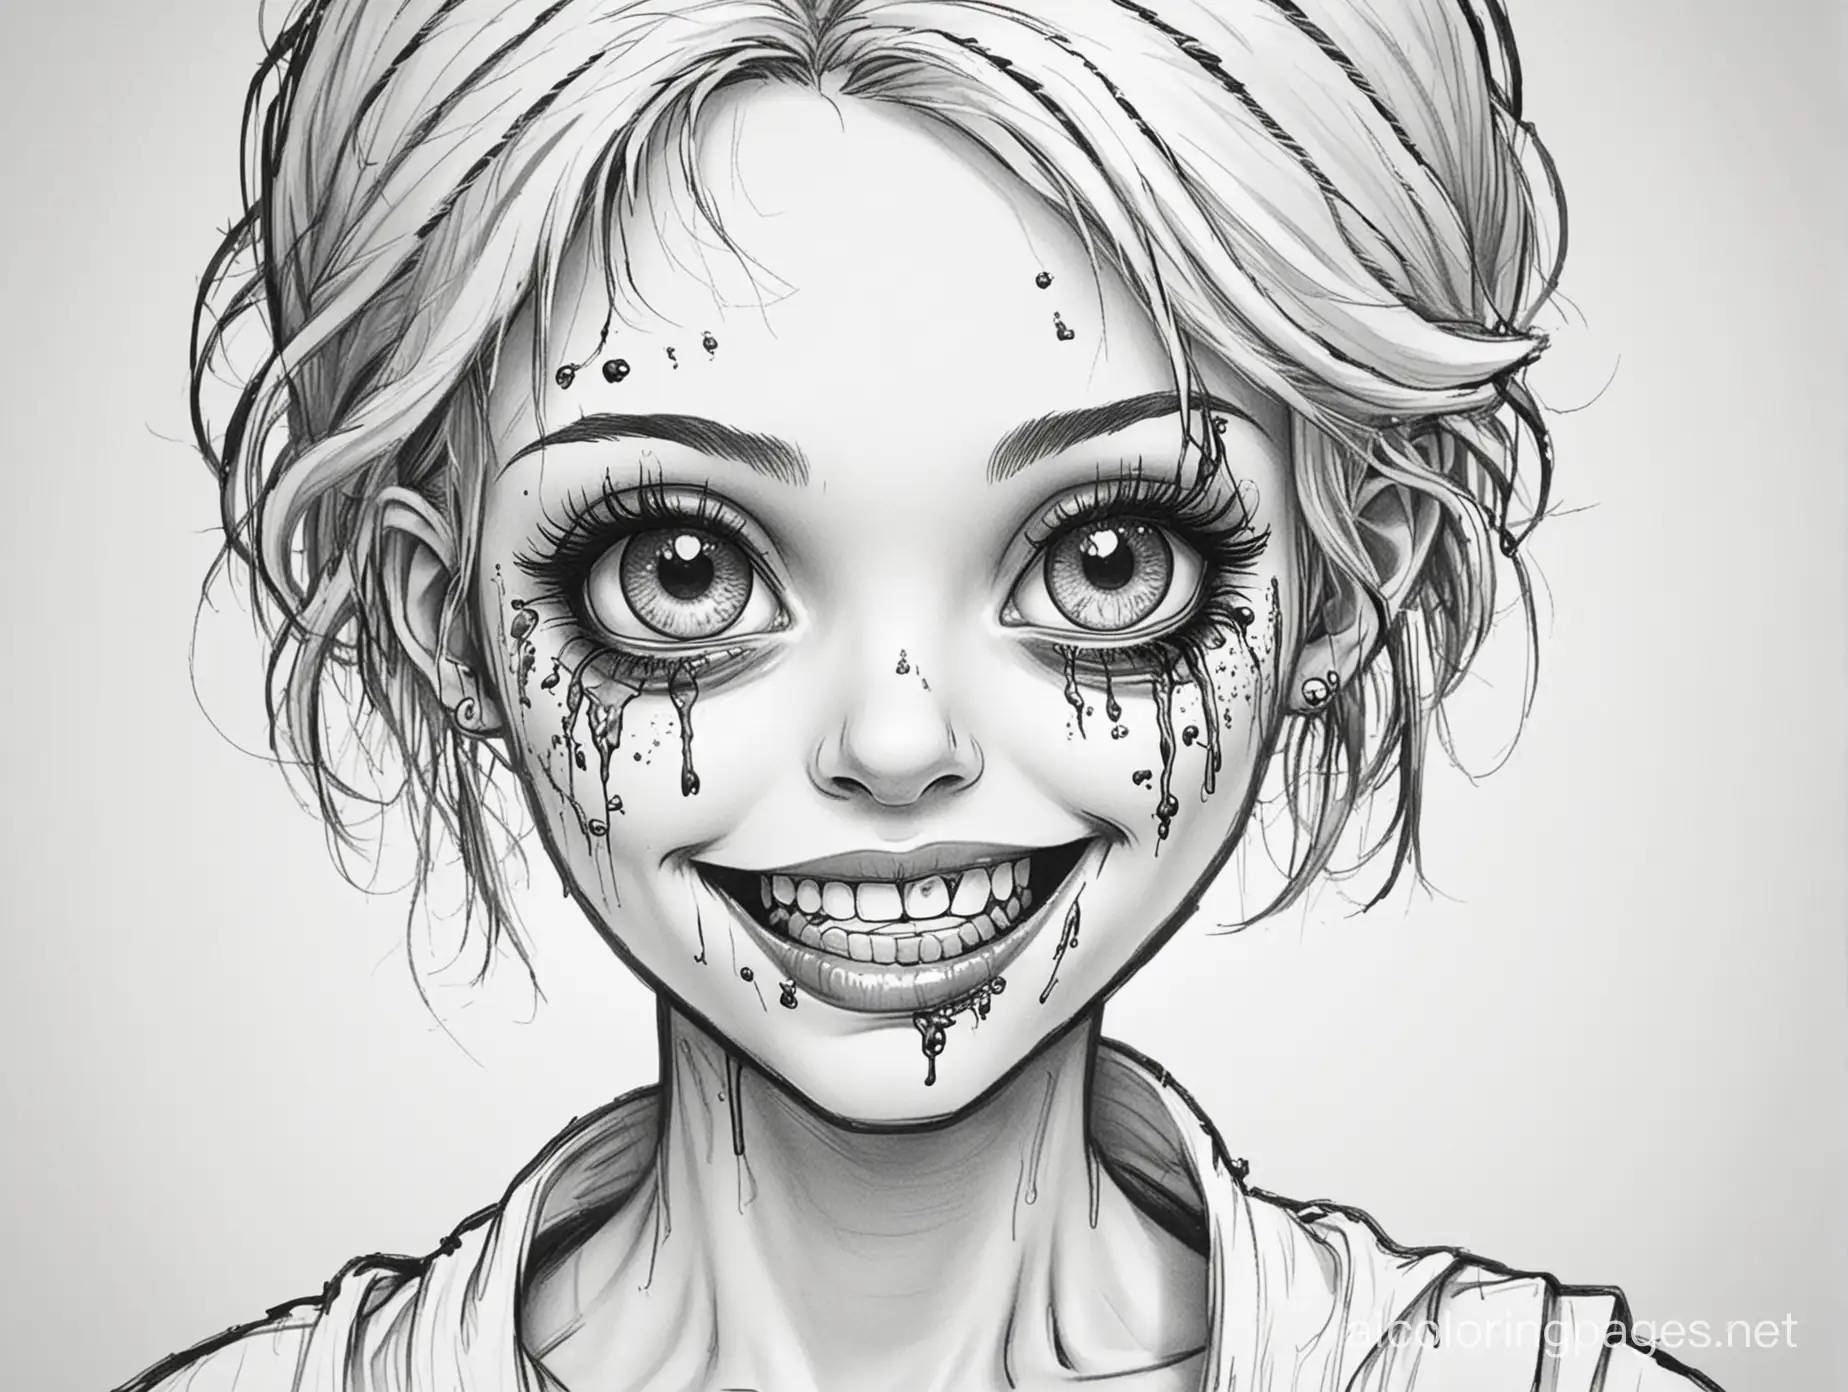 zombie with black eyes and a beautiful smile, Coloring Page, black and white, line art, white background, Simplicity, Ample White Space. The background of the coloring page is plain white to make it easy for young children to color within the lines. The outlines of all the subjects are easy to distinguish, making it simple for kids to color without too much difficulty